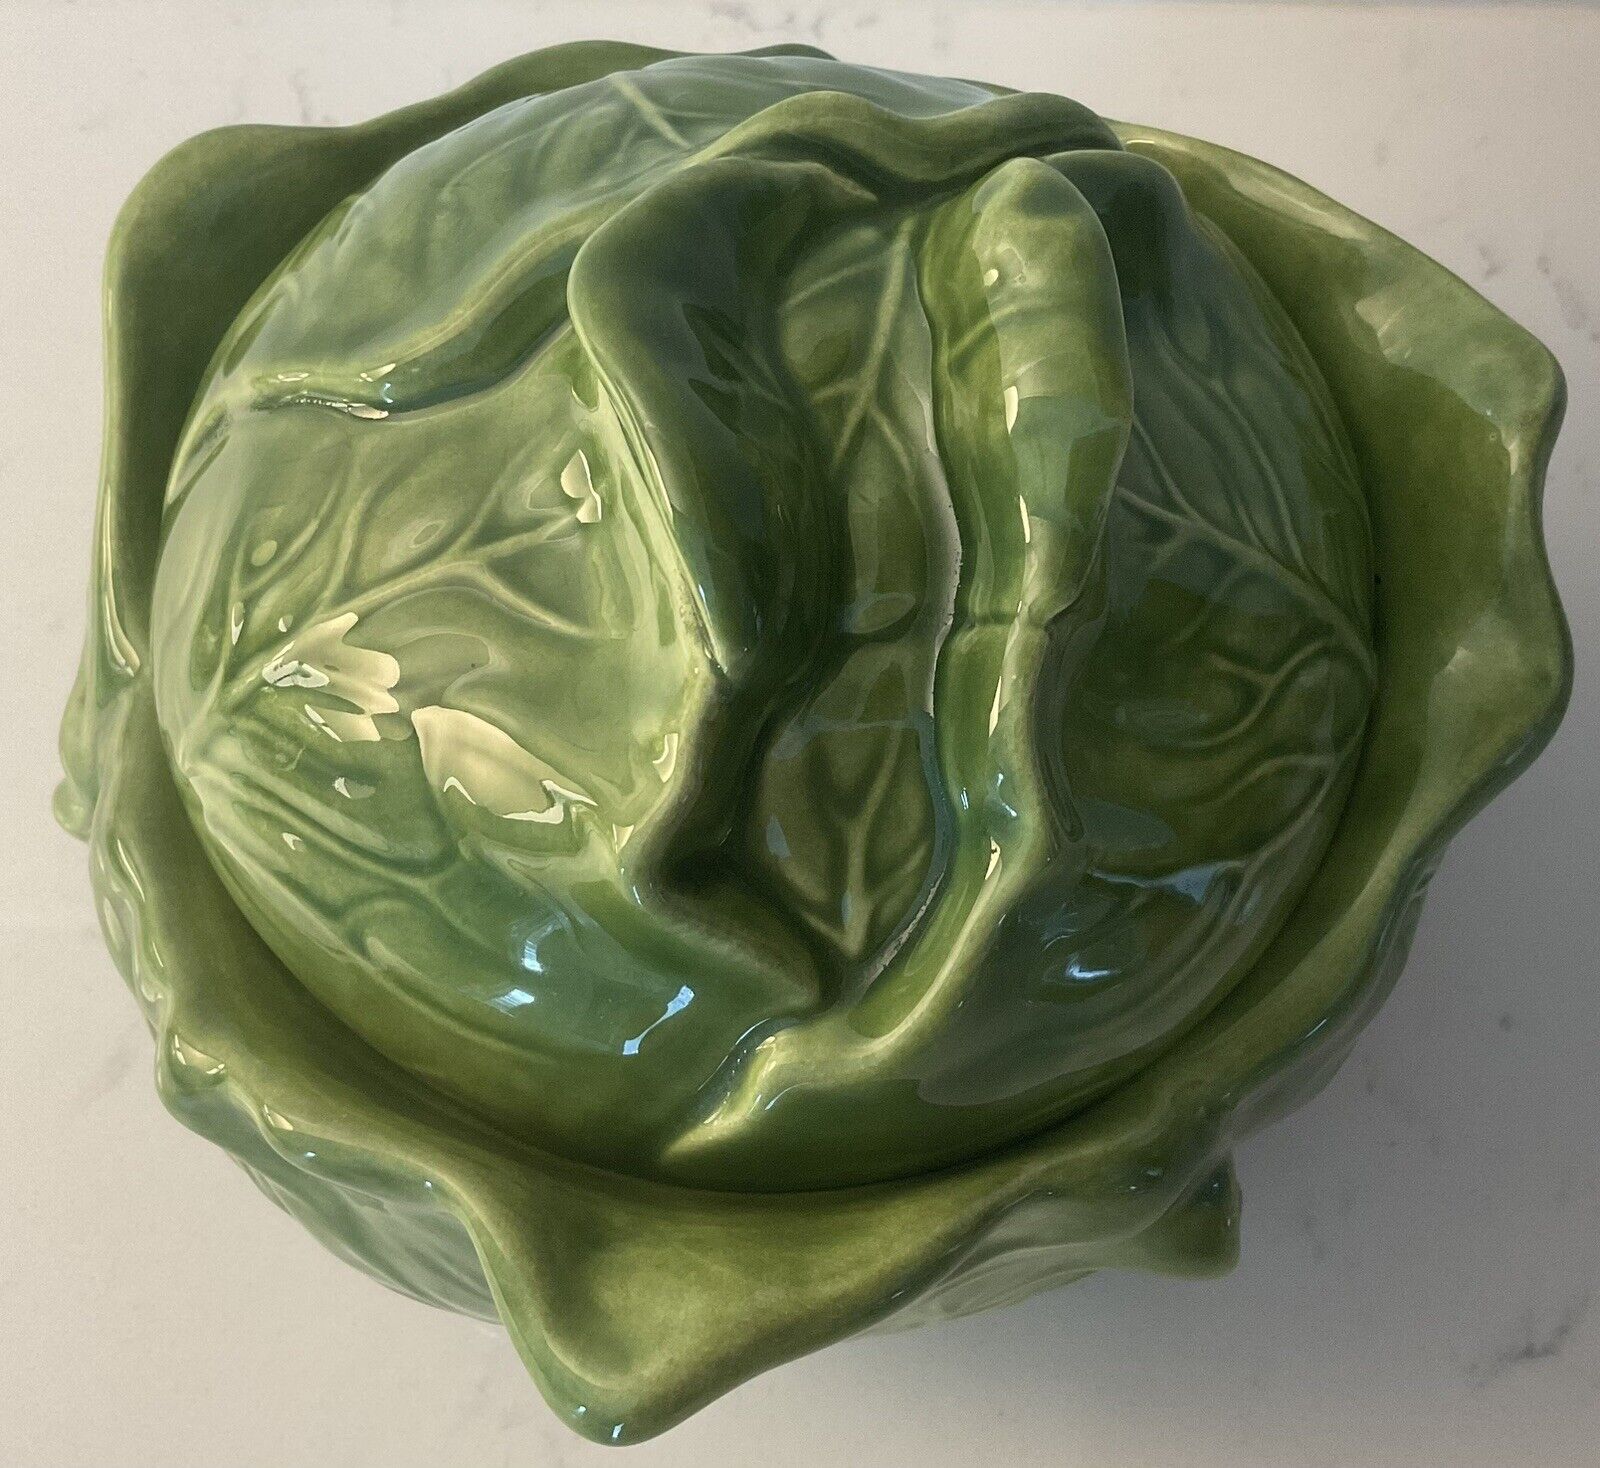 Vintage Holland Mold Green Ceramic Covered Cabbage Dish